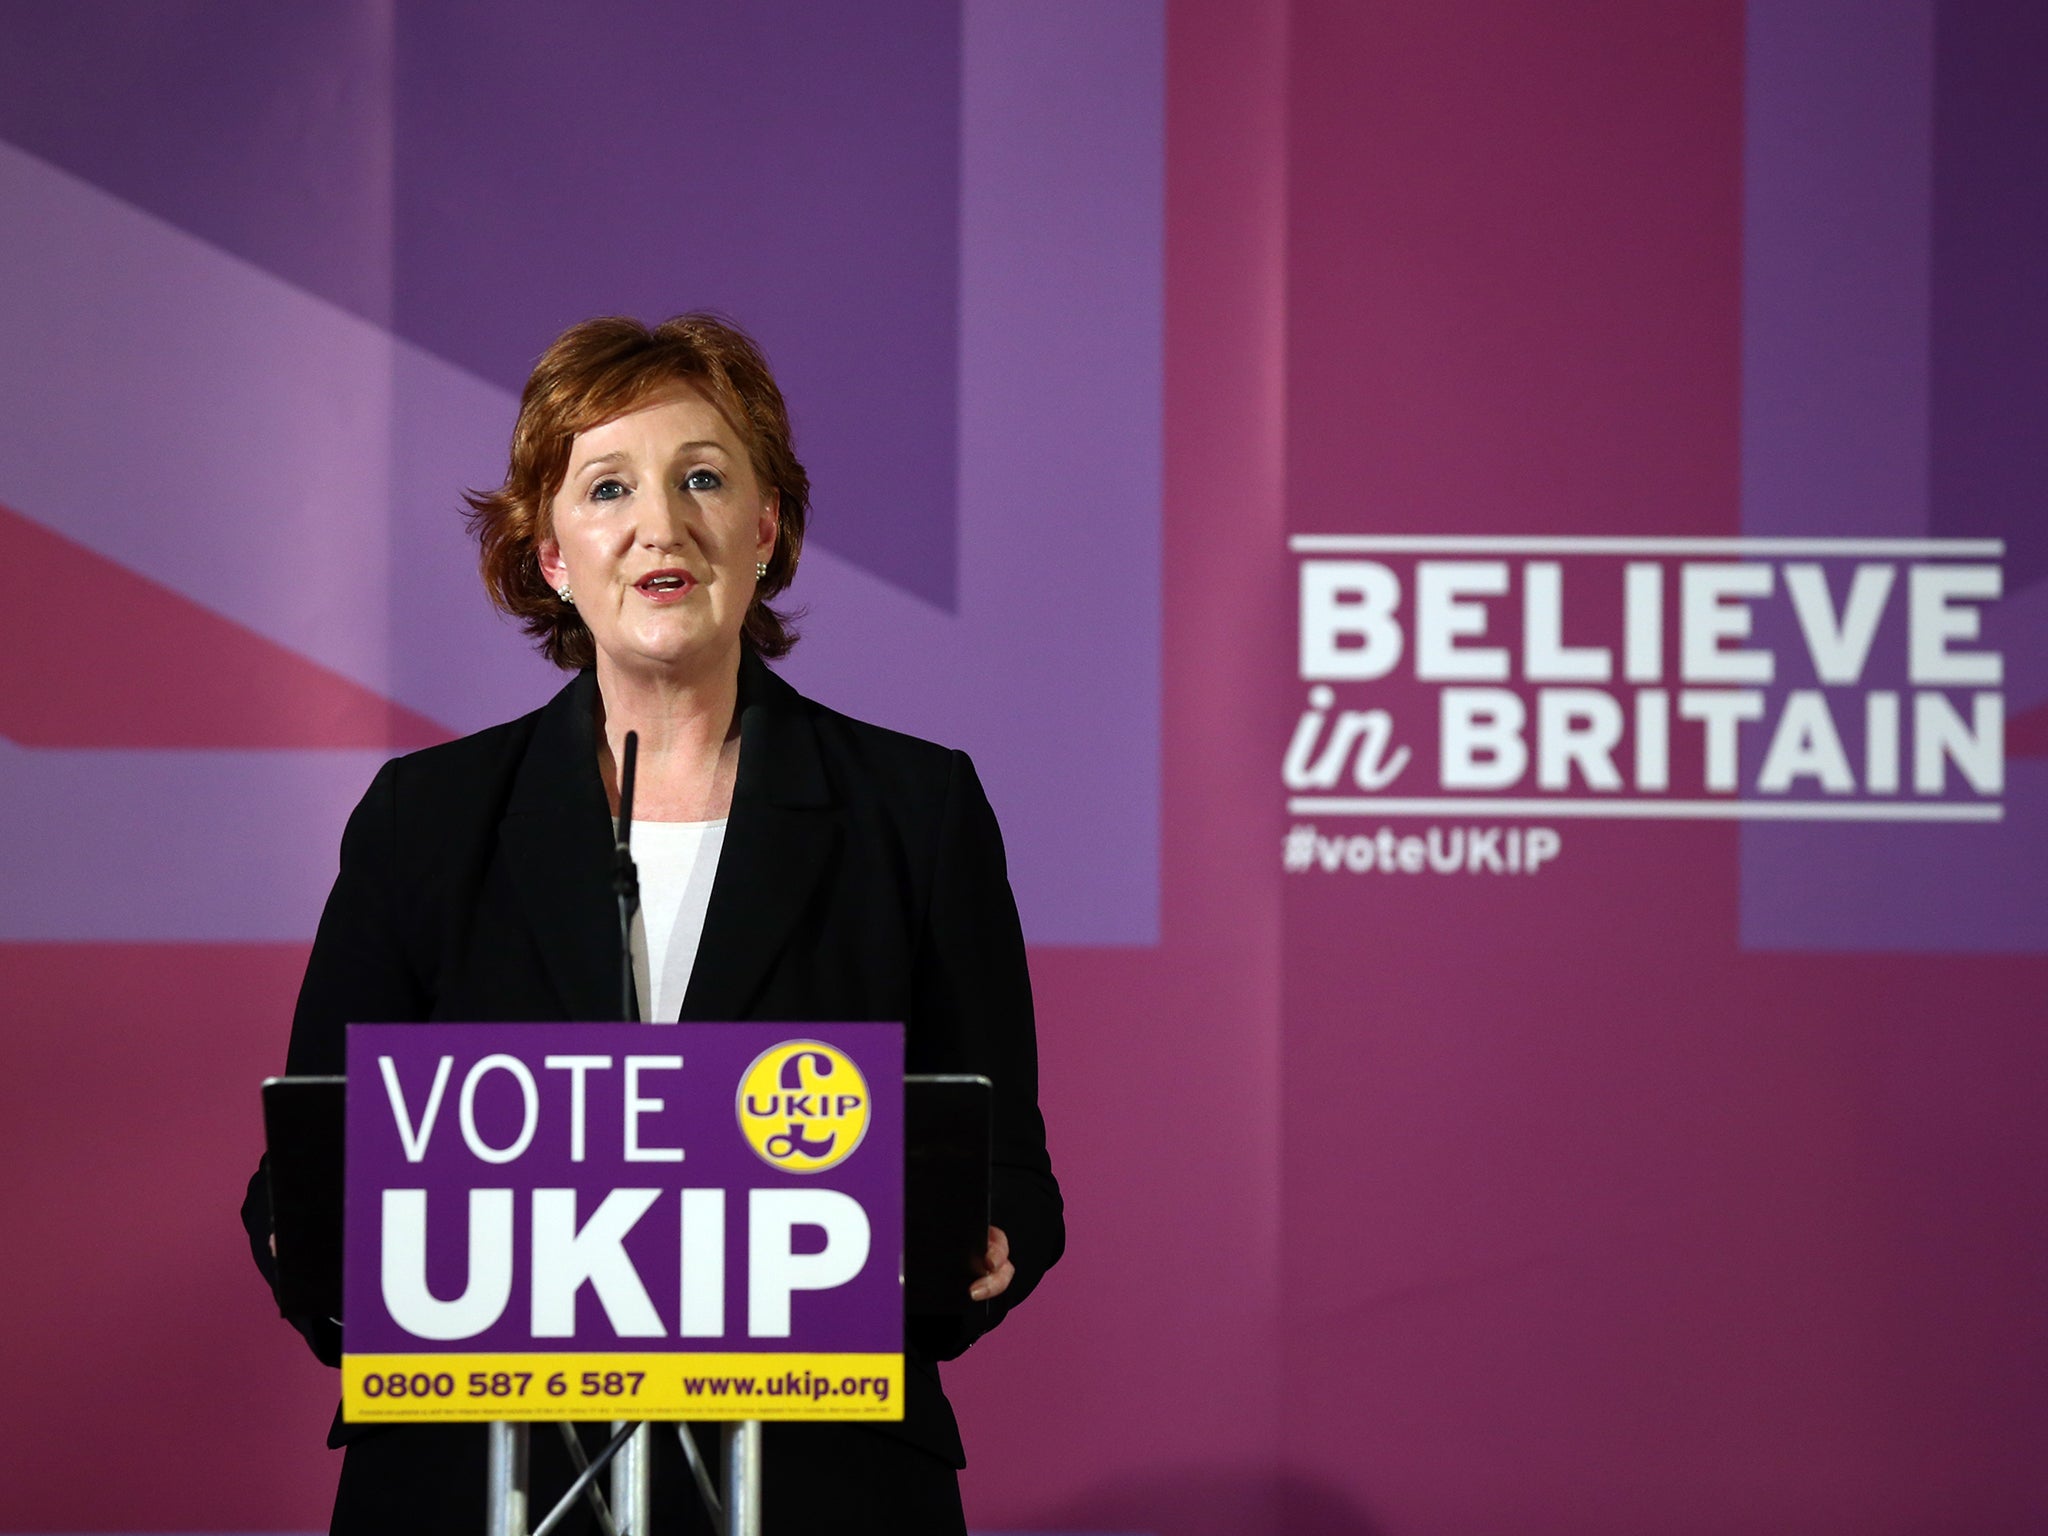 Suzanne Evans has had a tough year in Ukip after being banned for six months over comments about Nigel Farage